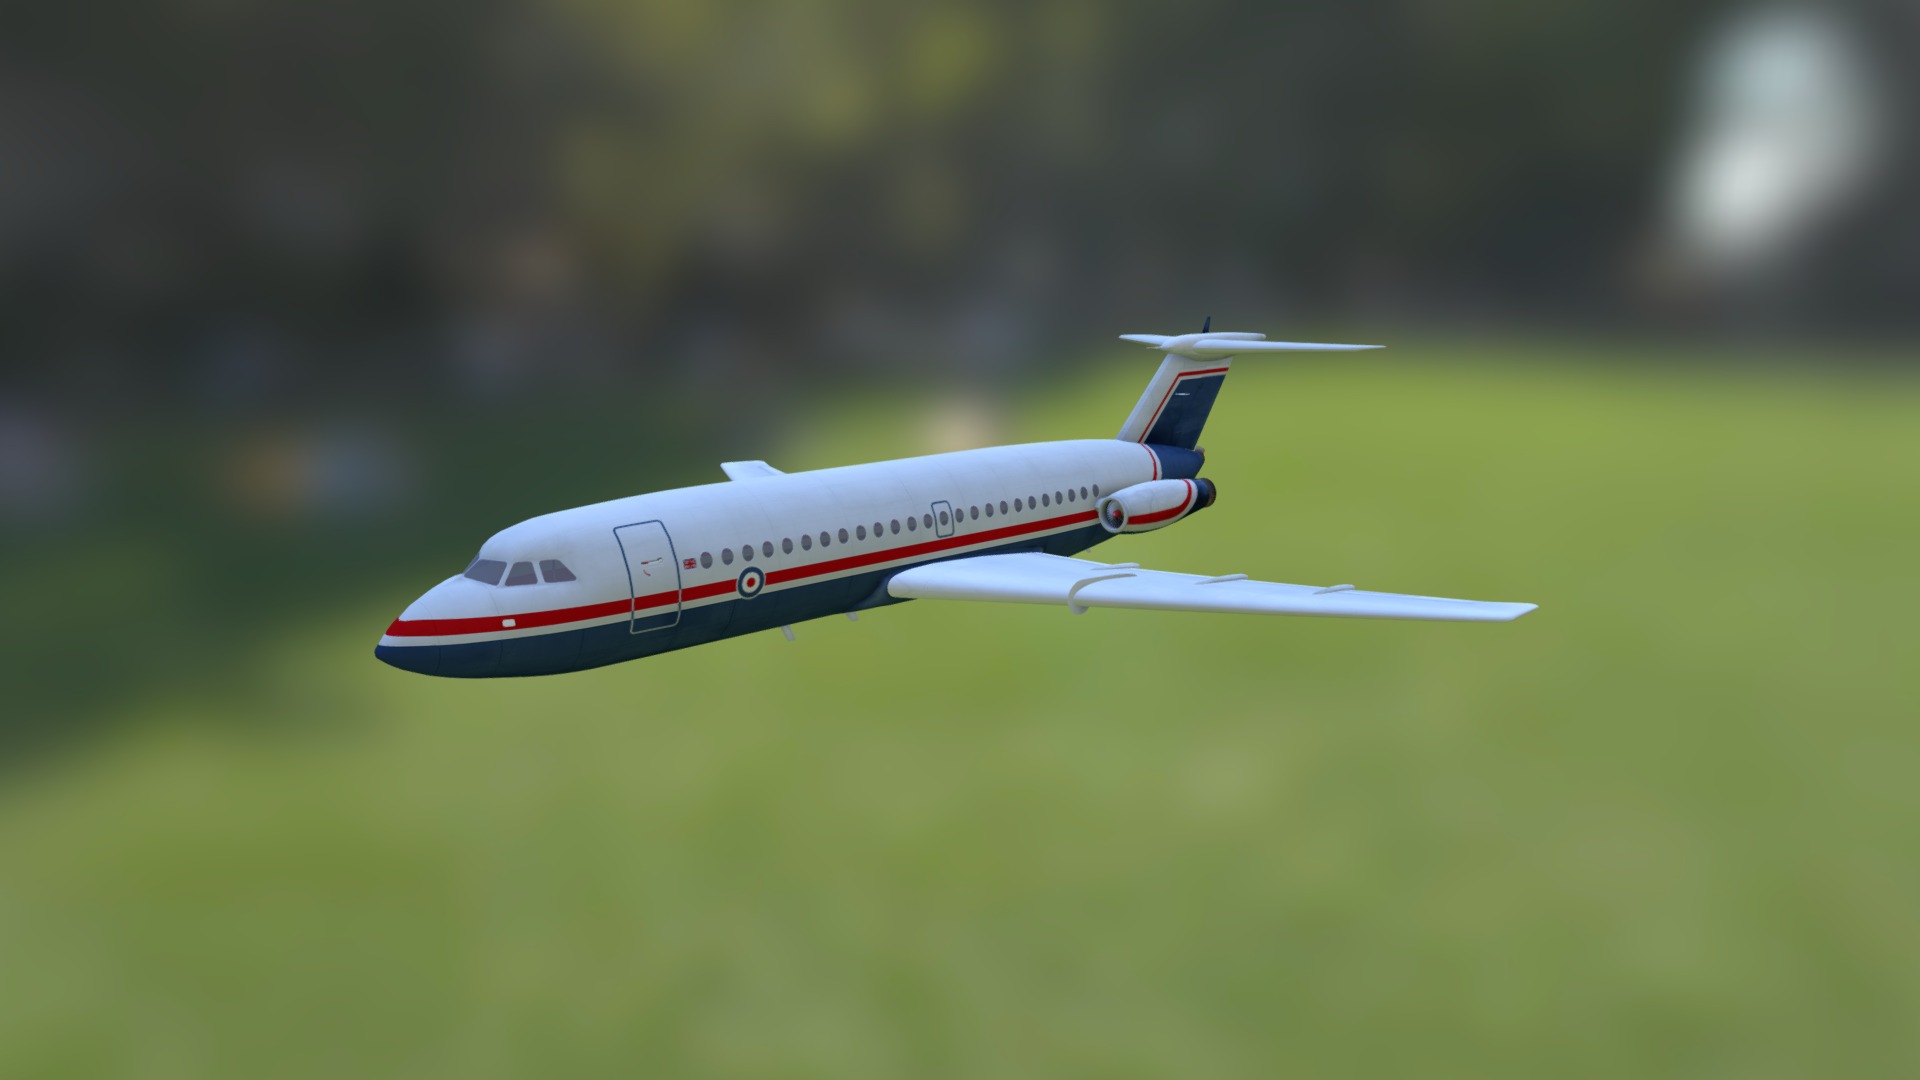 3D model British Aircraft Corp 475 - This is a 3D model of the British Aircraft Corp 475. The 3D model is about a red and white airplane flying.